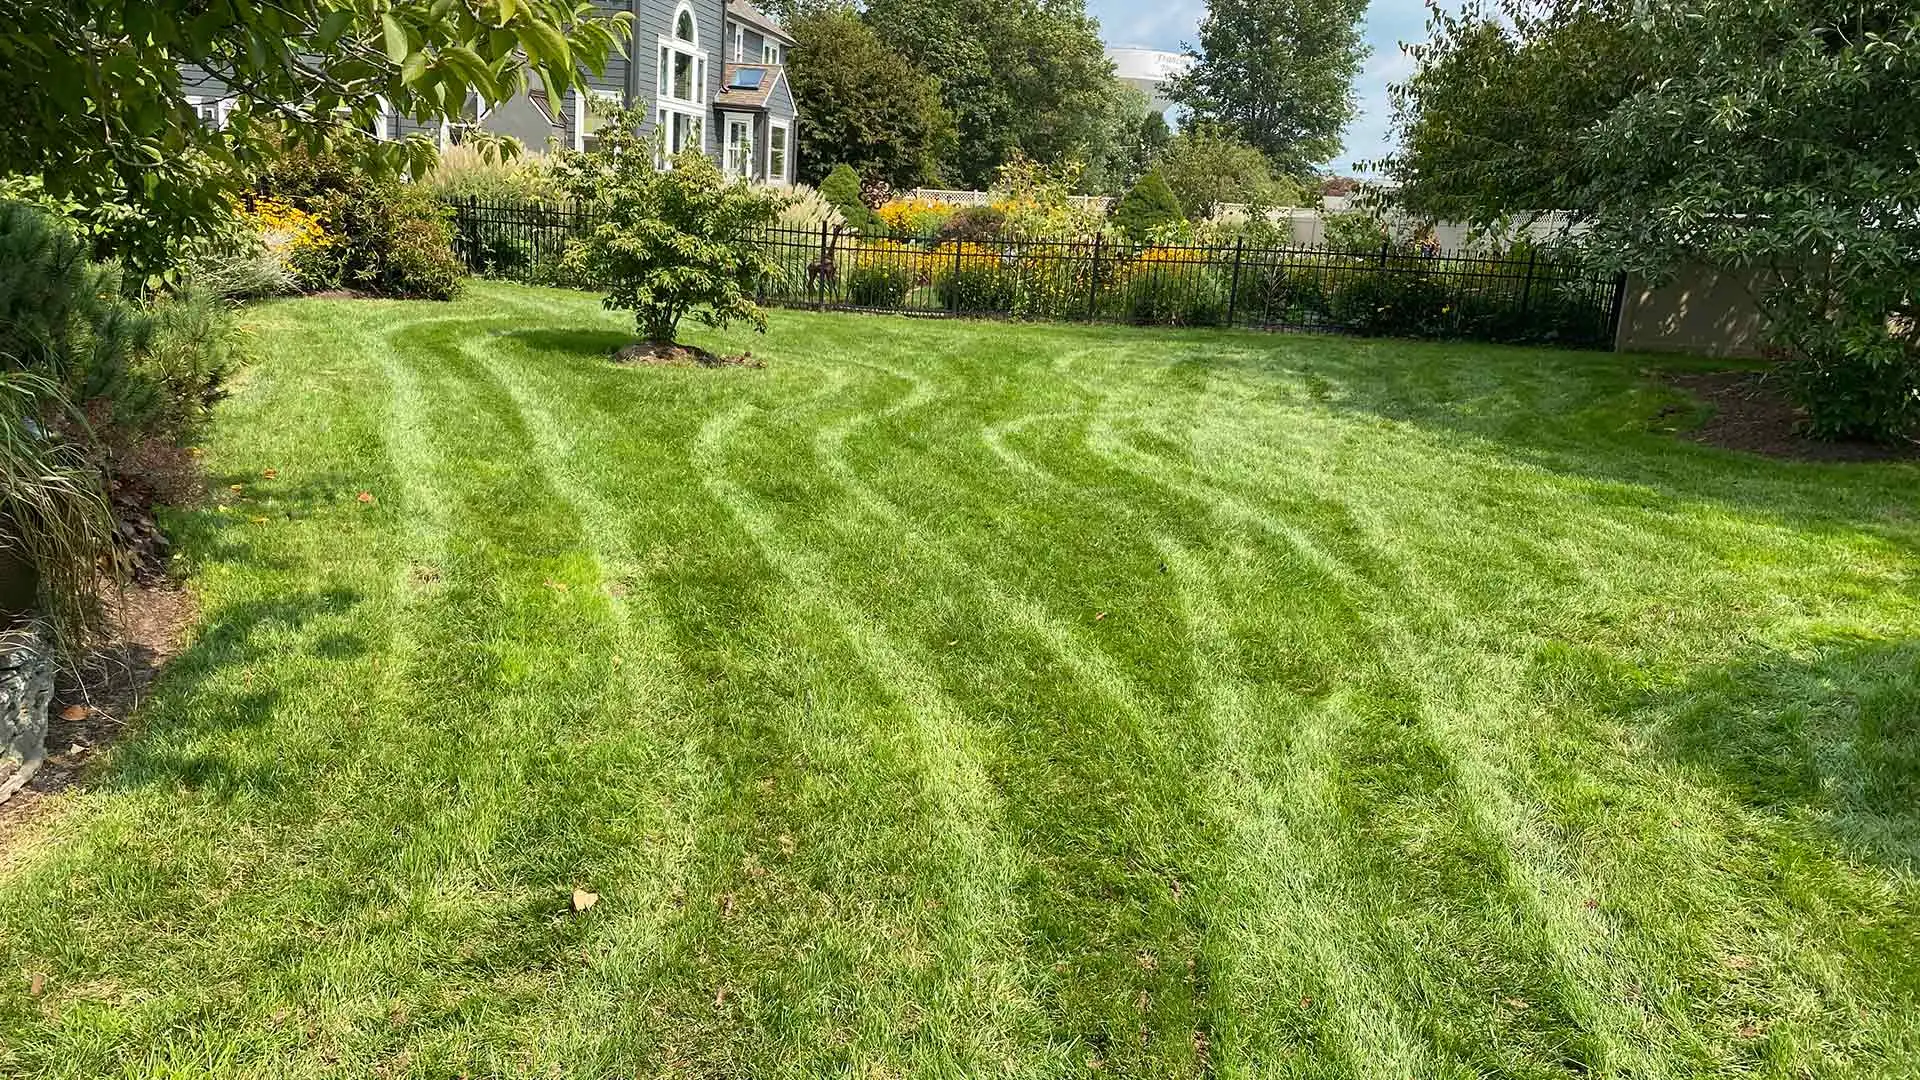 Lush, green lawn and landscaping around a home in Telford, PA.